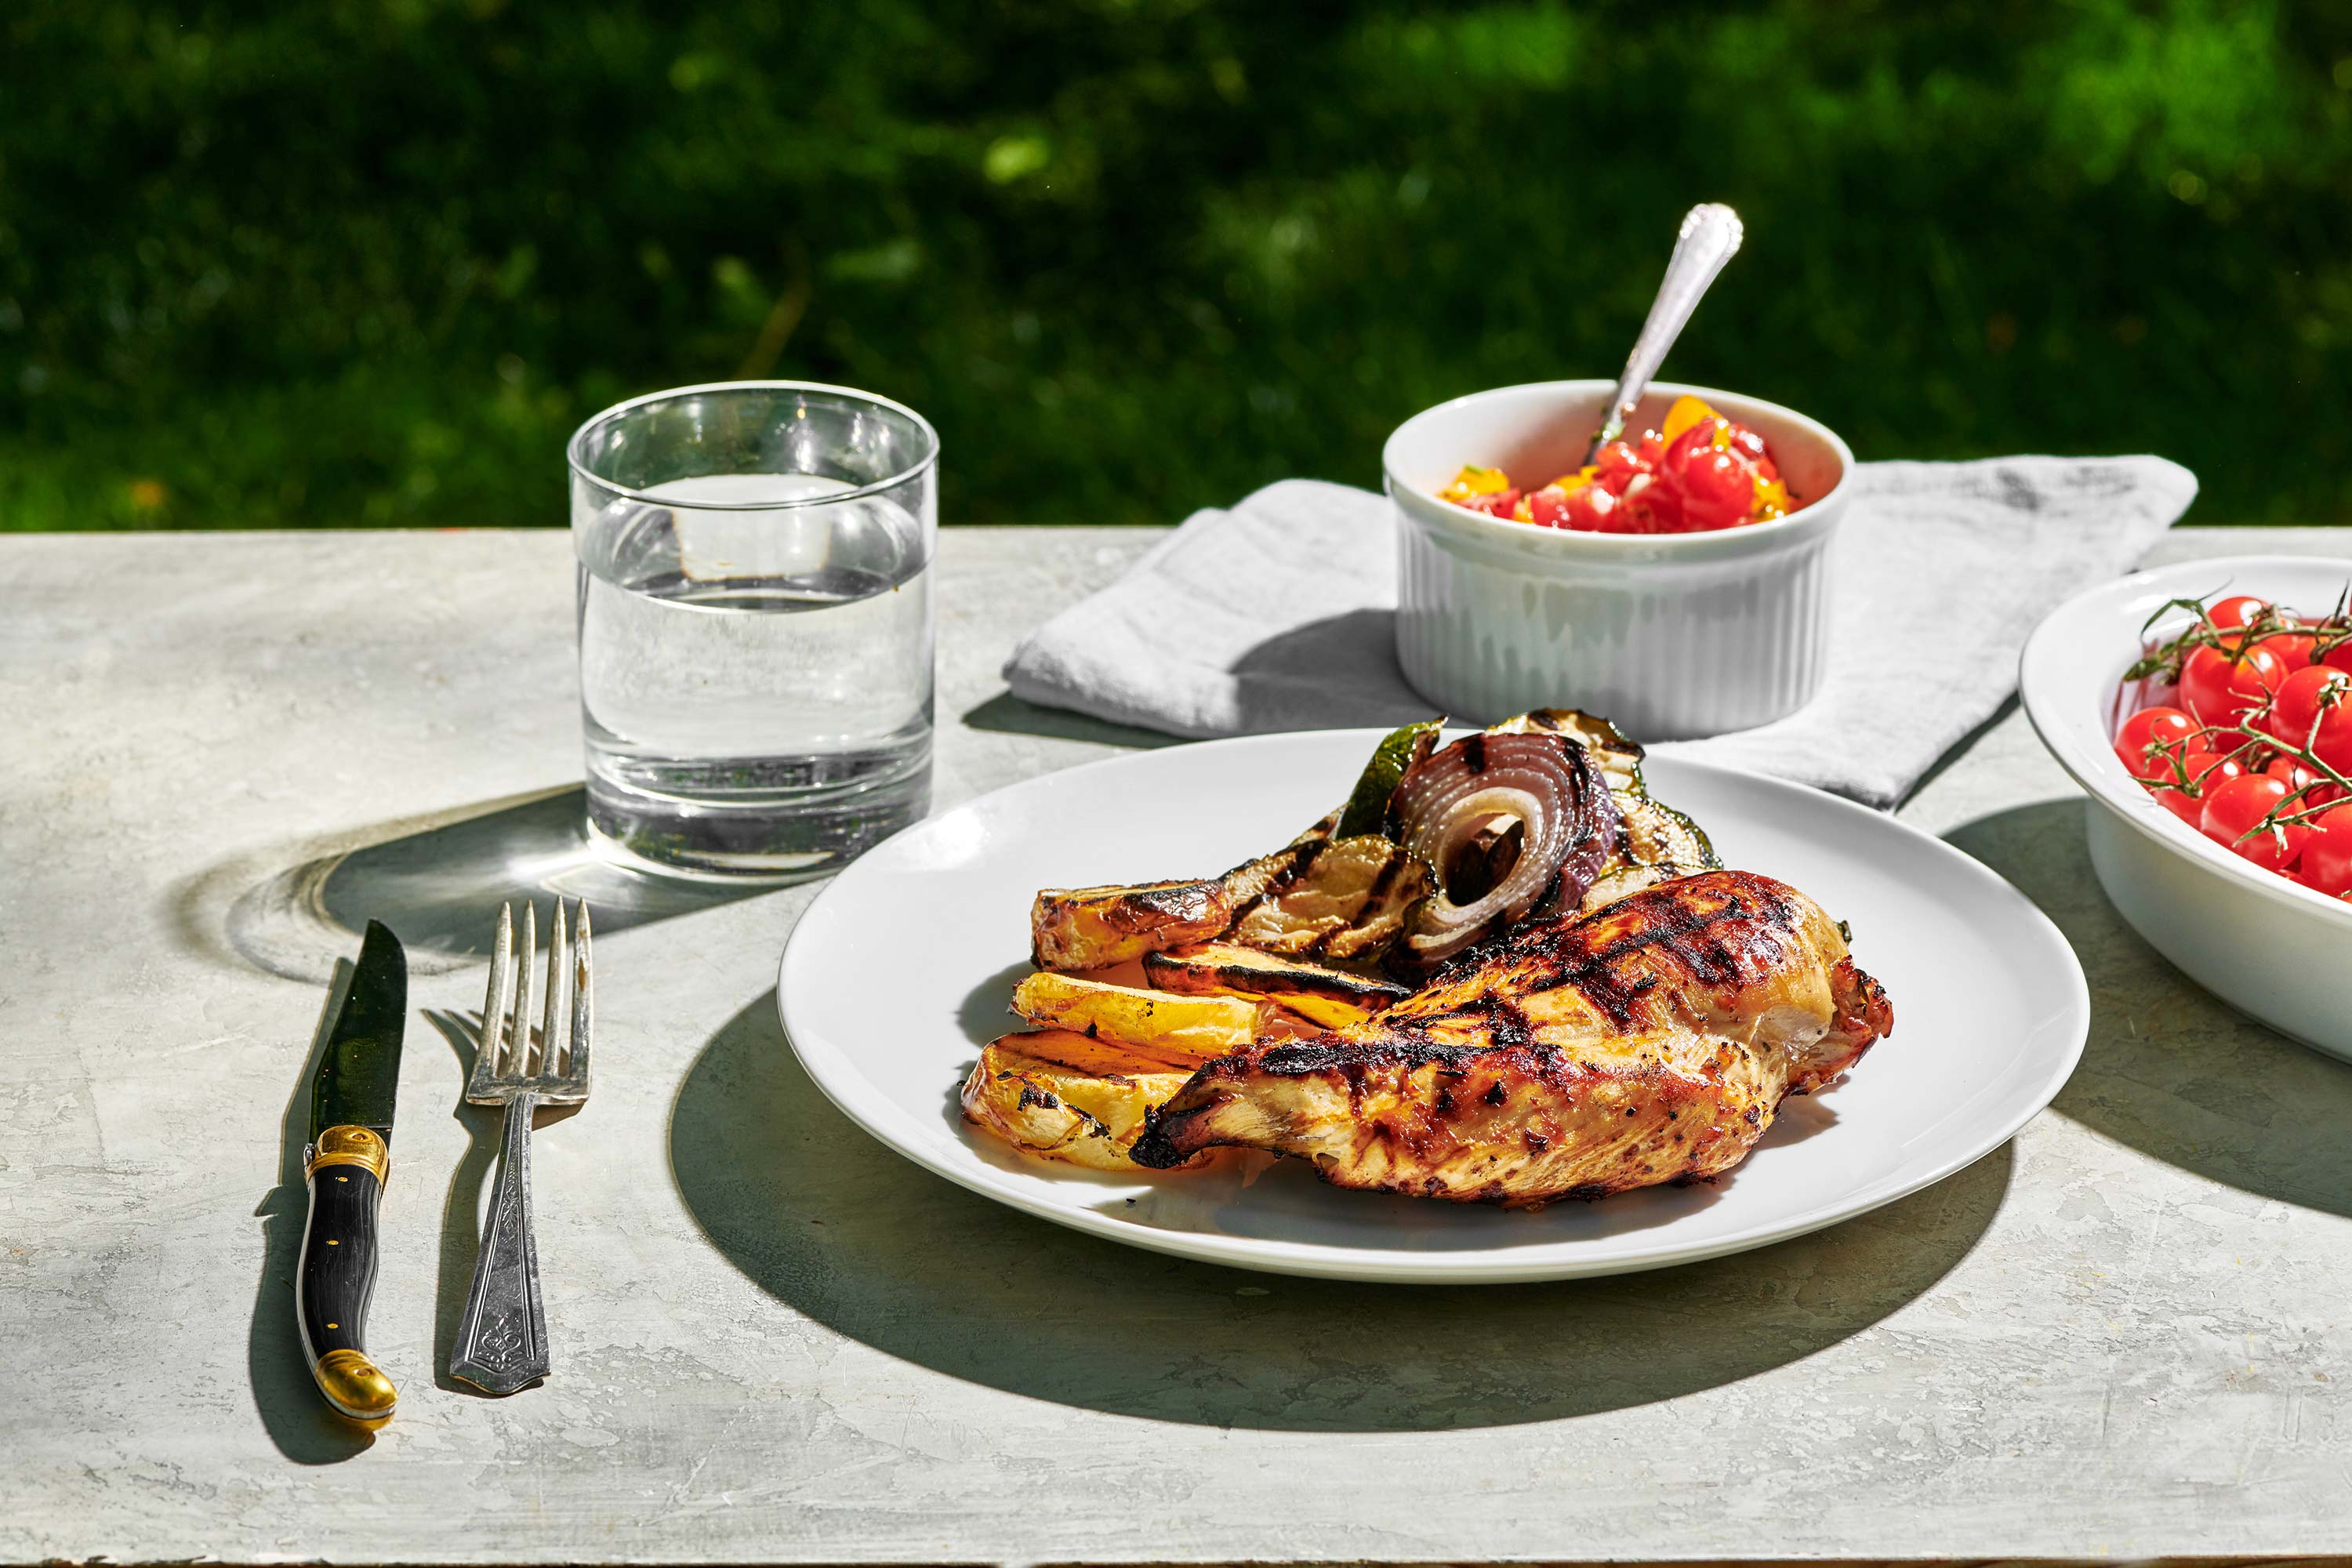 Grilled Chicken Breast and vegetables on a plate on an outdoor table.